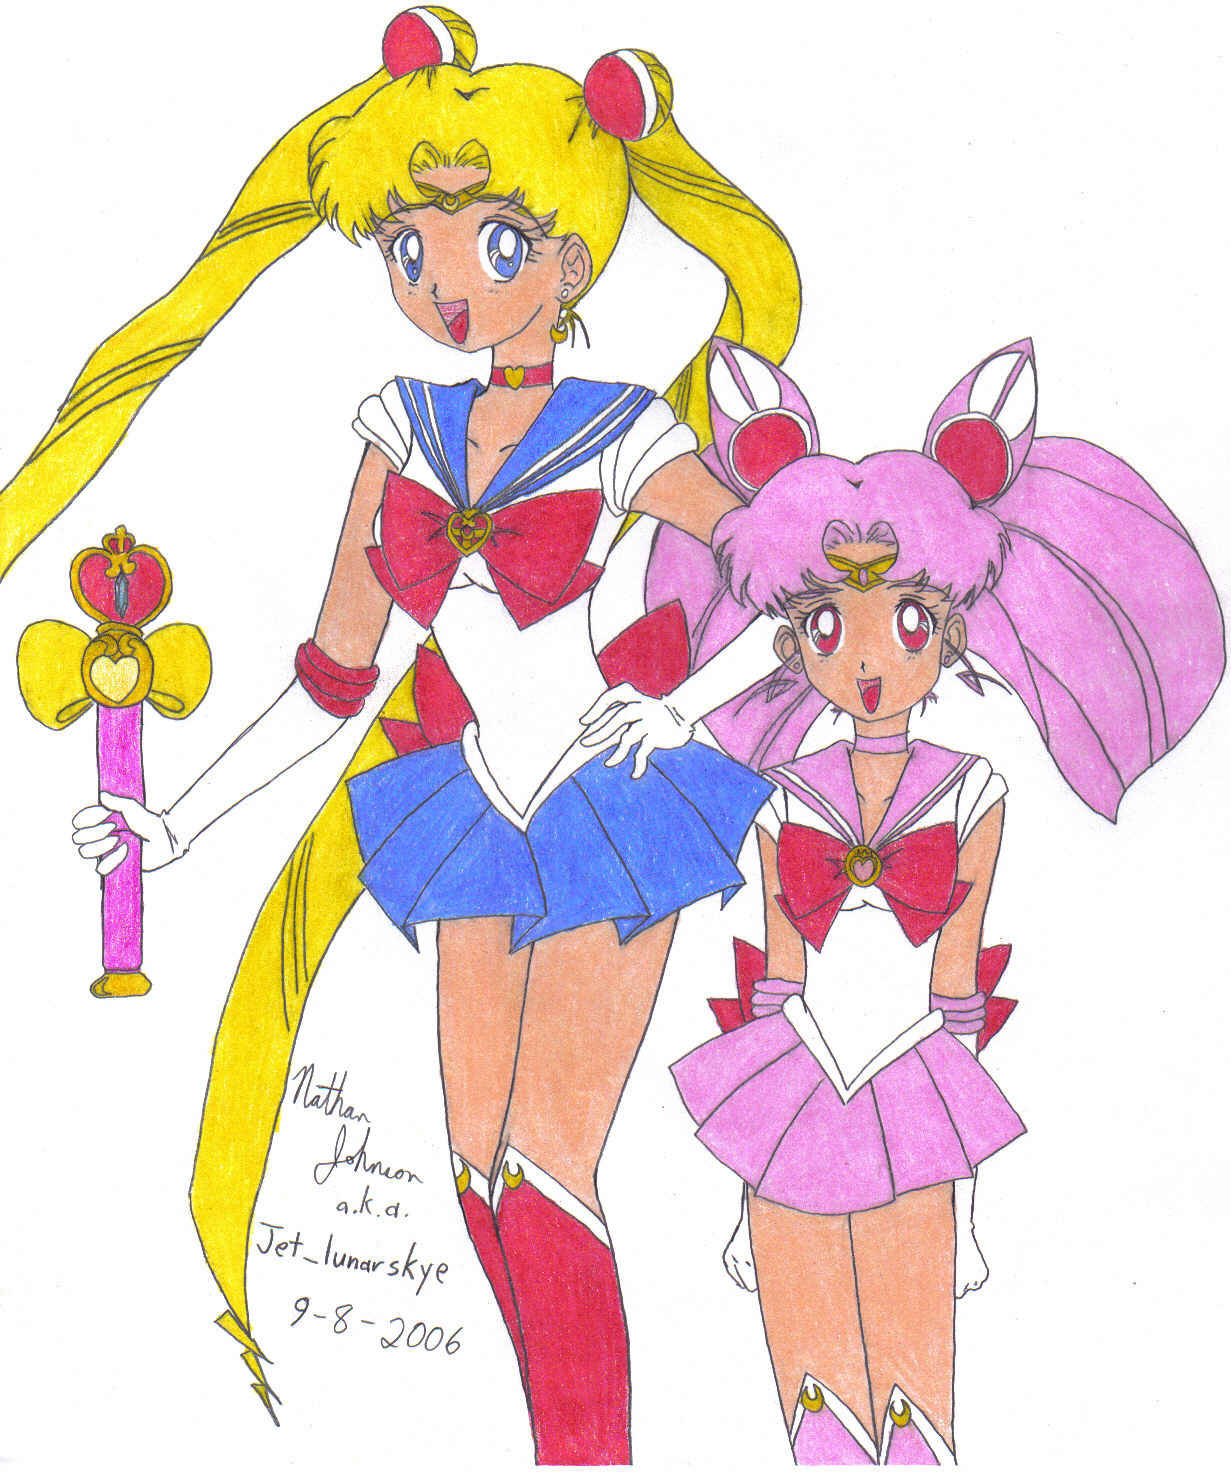 Sailor Moon S: Sailor Moon and Chibimoon by Jet_lunarskye